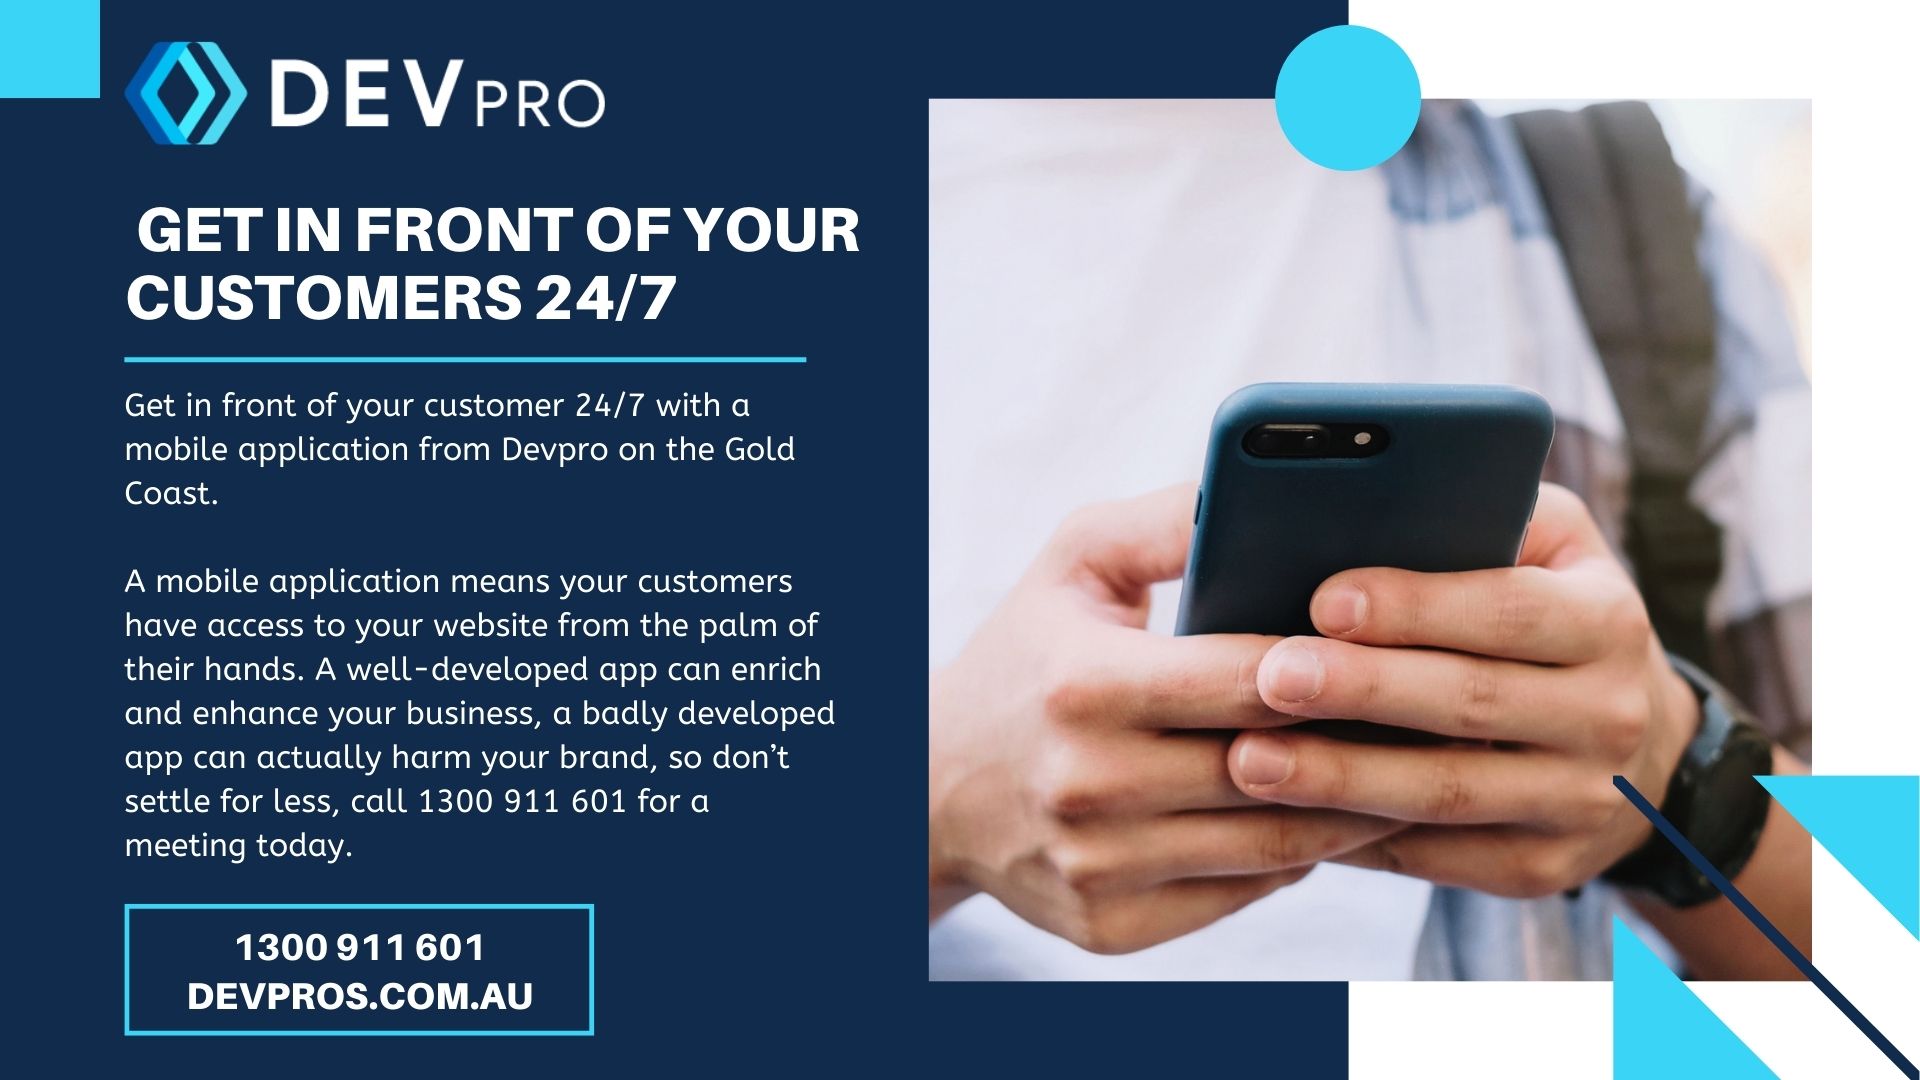 Get in front of your customers 24/7 - Software Development Byron Bay - Devpro